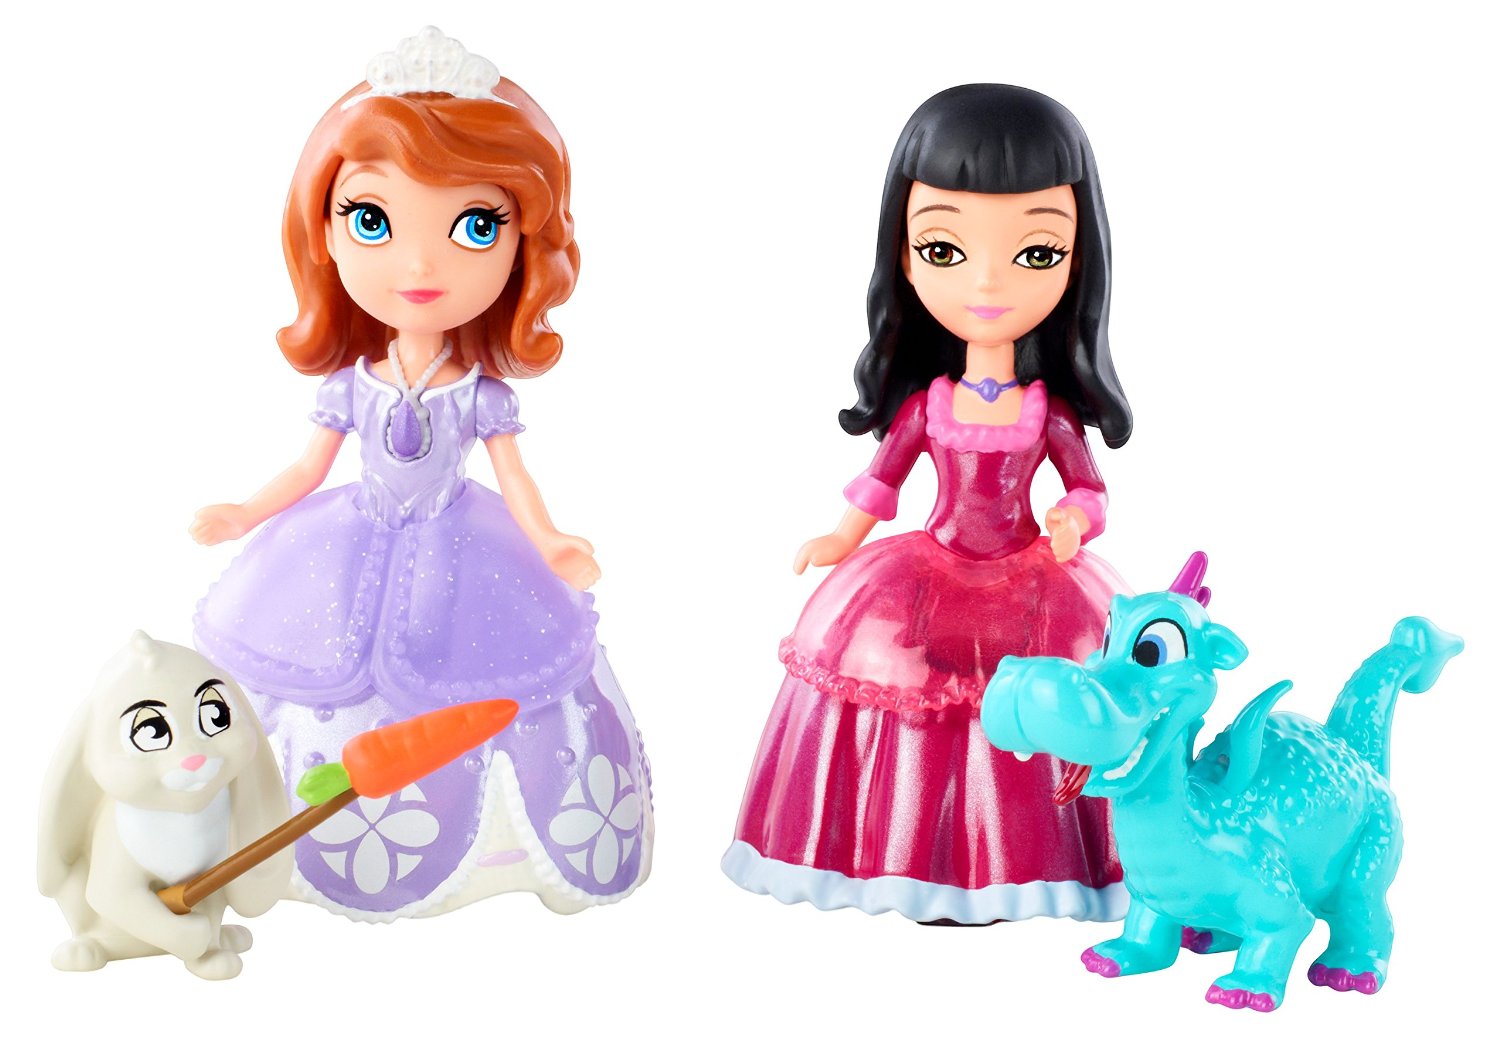 Disney Sofia The First Sofia Vivian and Animal Friends Giftset Only $5.29 – 65% Savings